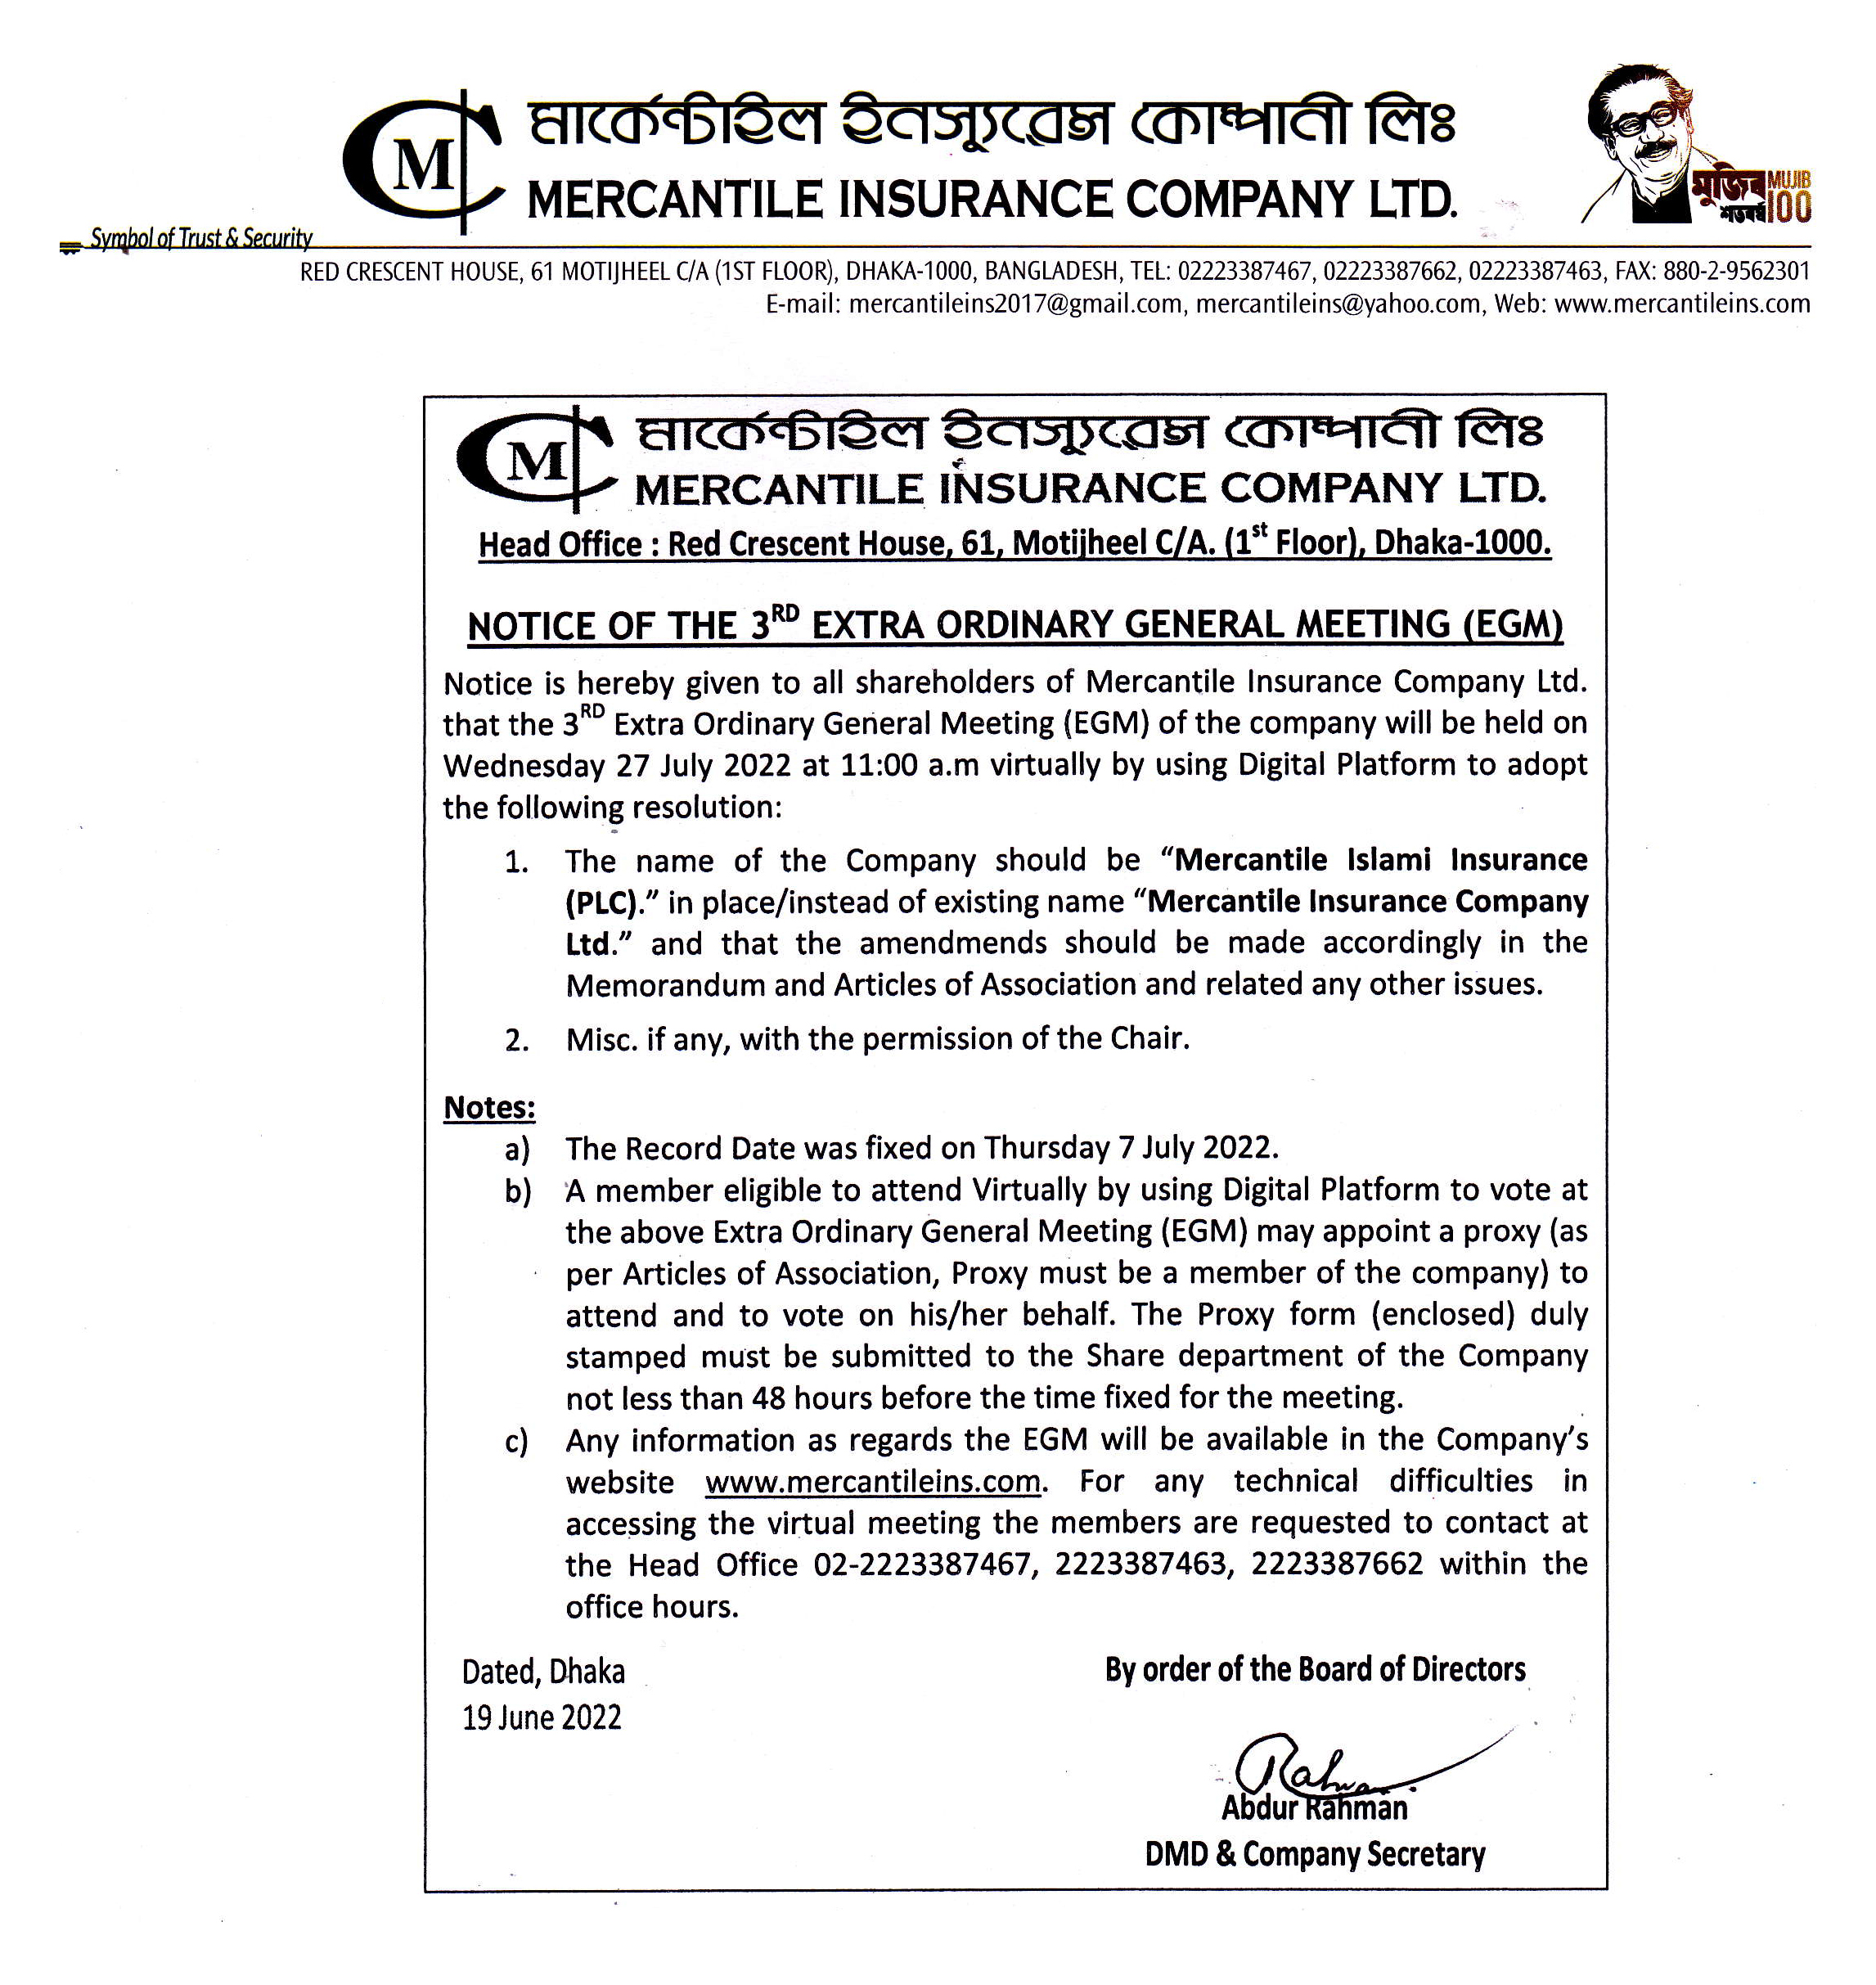 EGM Notice of Mercantile Insurance Company Limited.